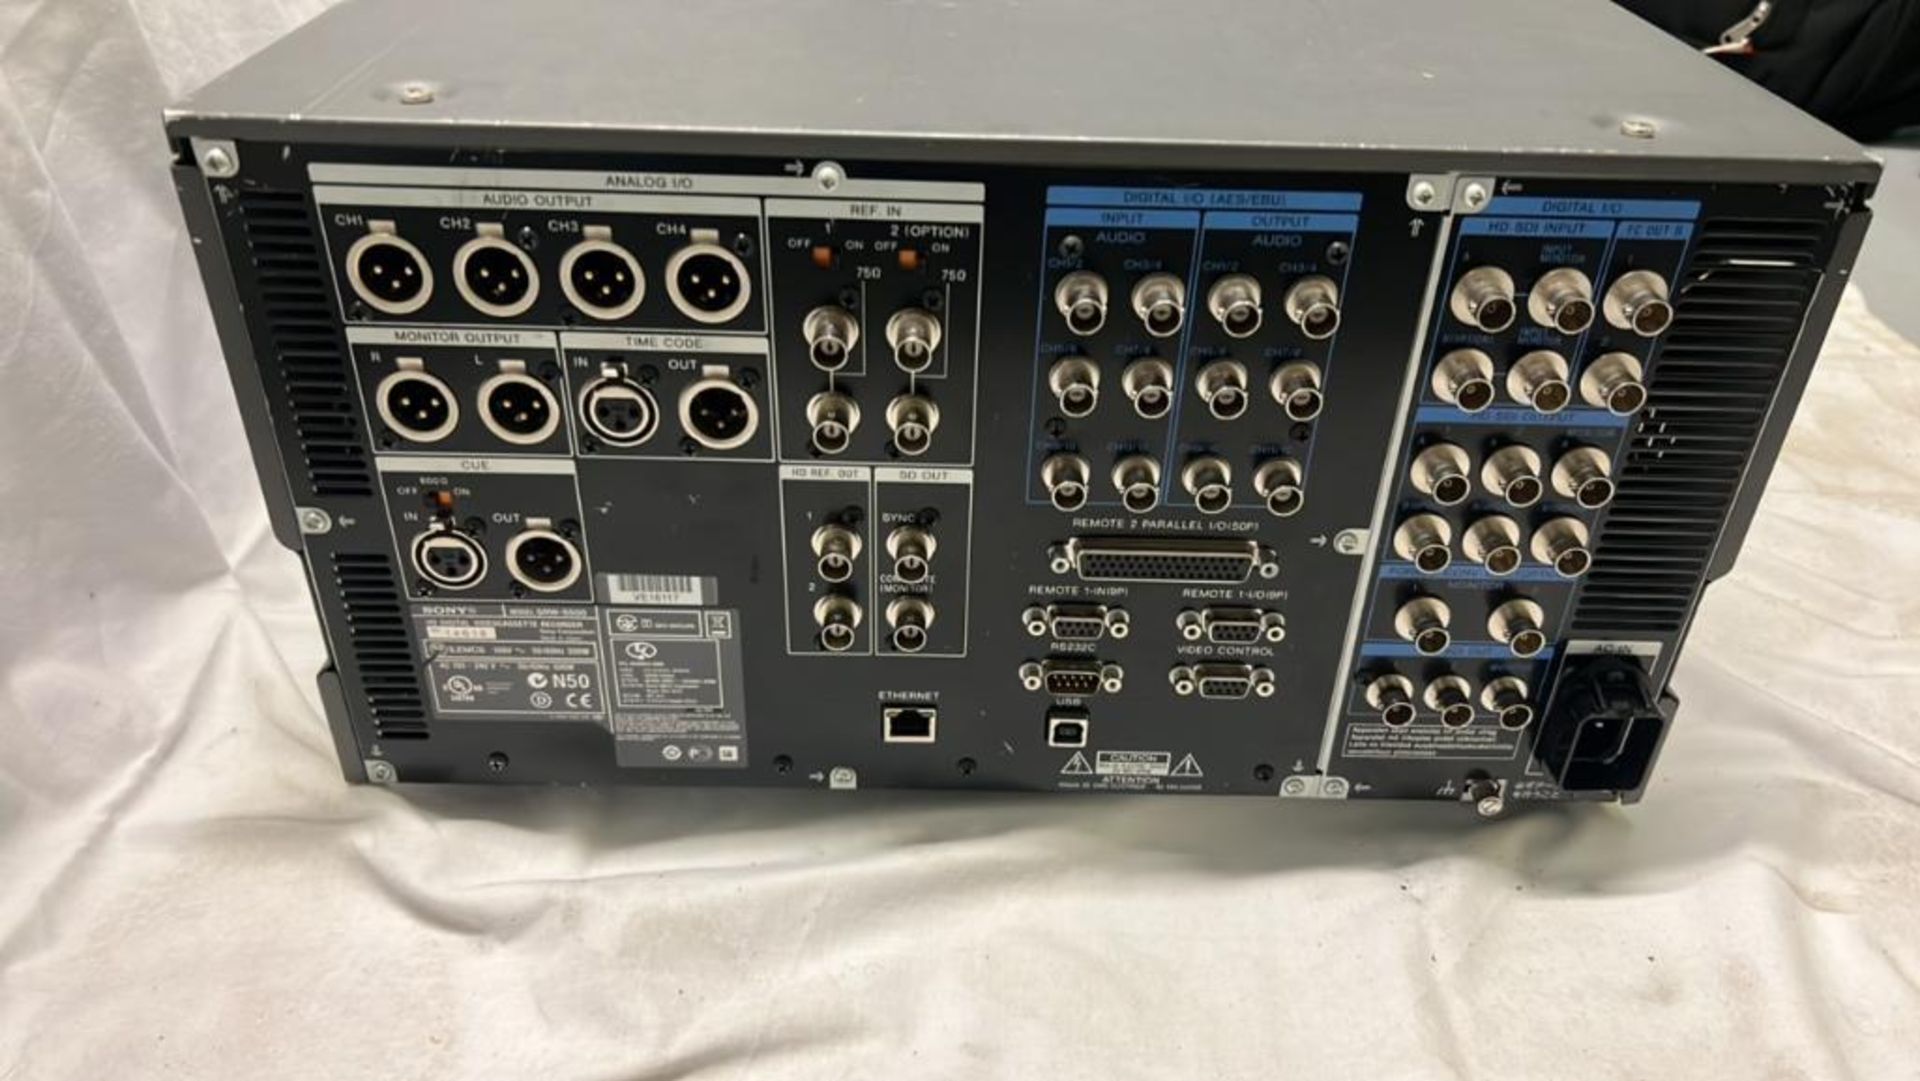 Sony SRW-550 Digital Videocassette recorder with flight case SN: 14618 - Image 4 of 6